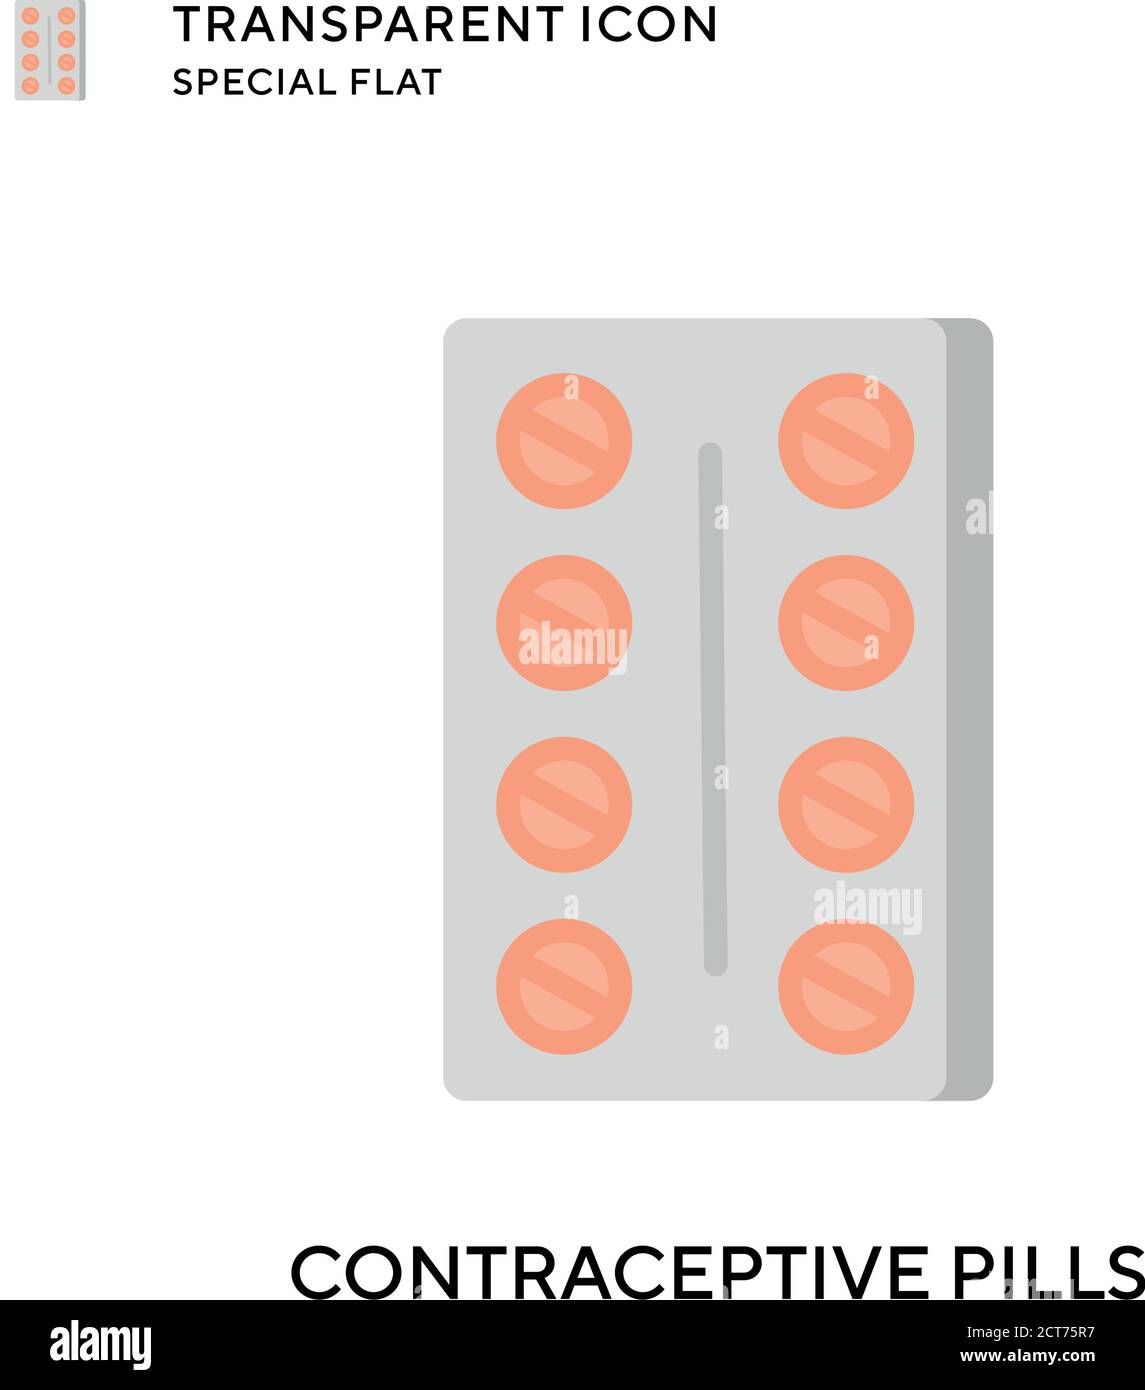 Contraceptive pills vector icon. Flat style illustration. EPS 10 vector. Stock Vector